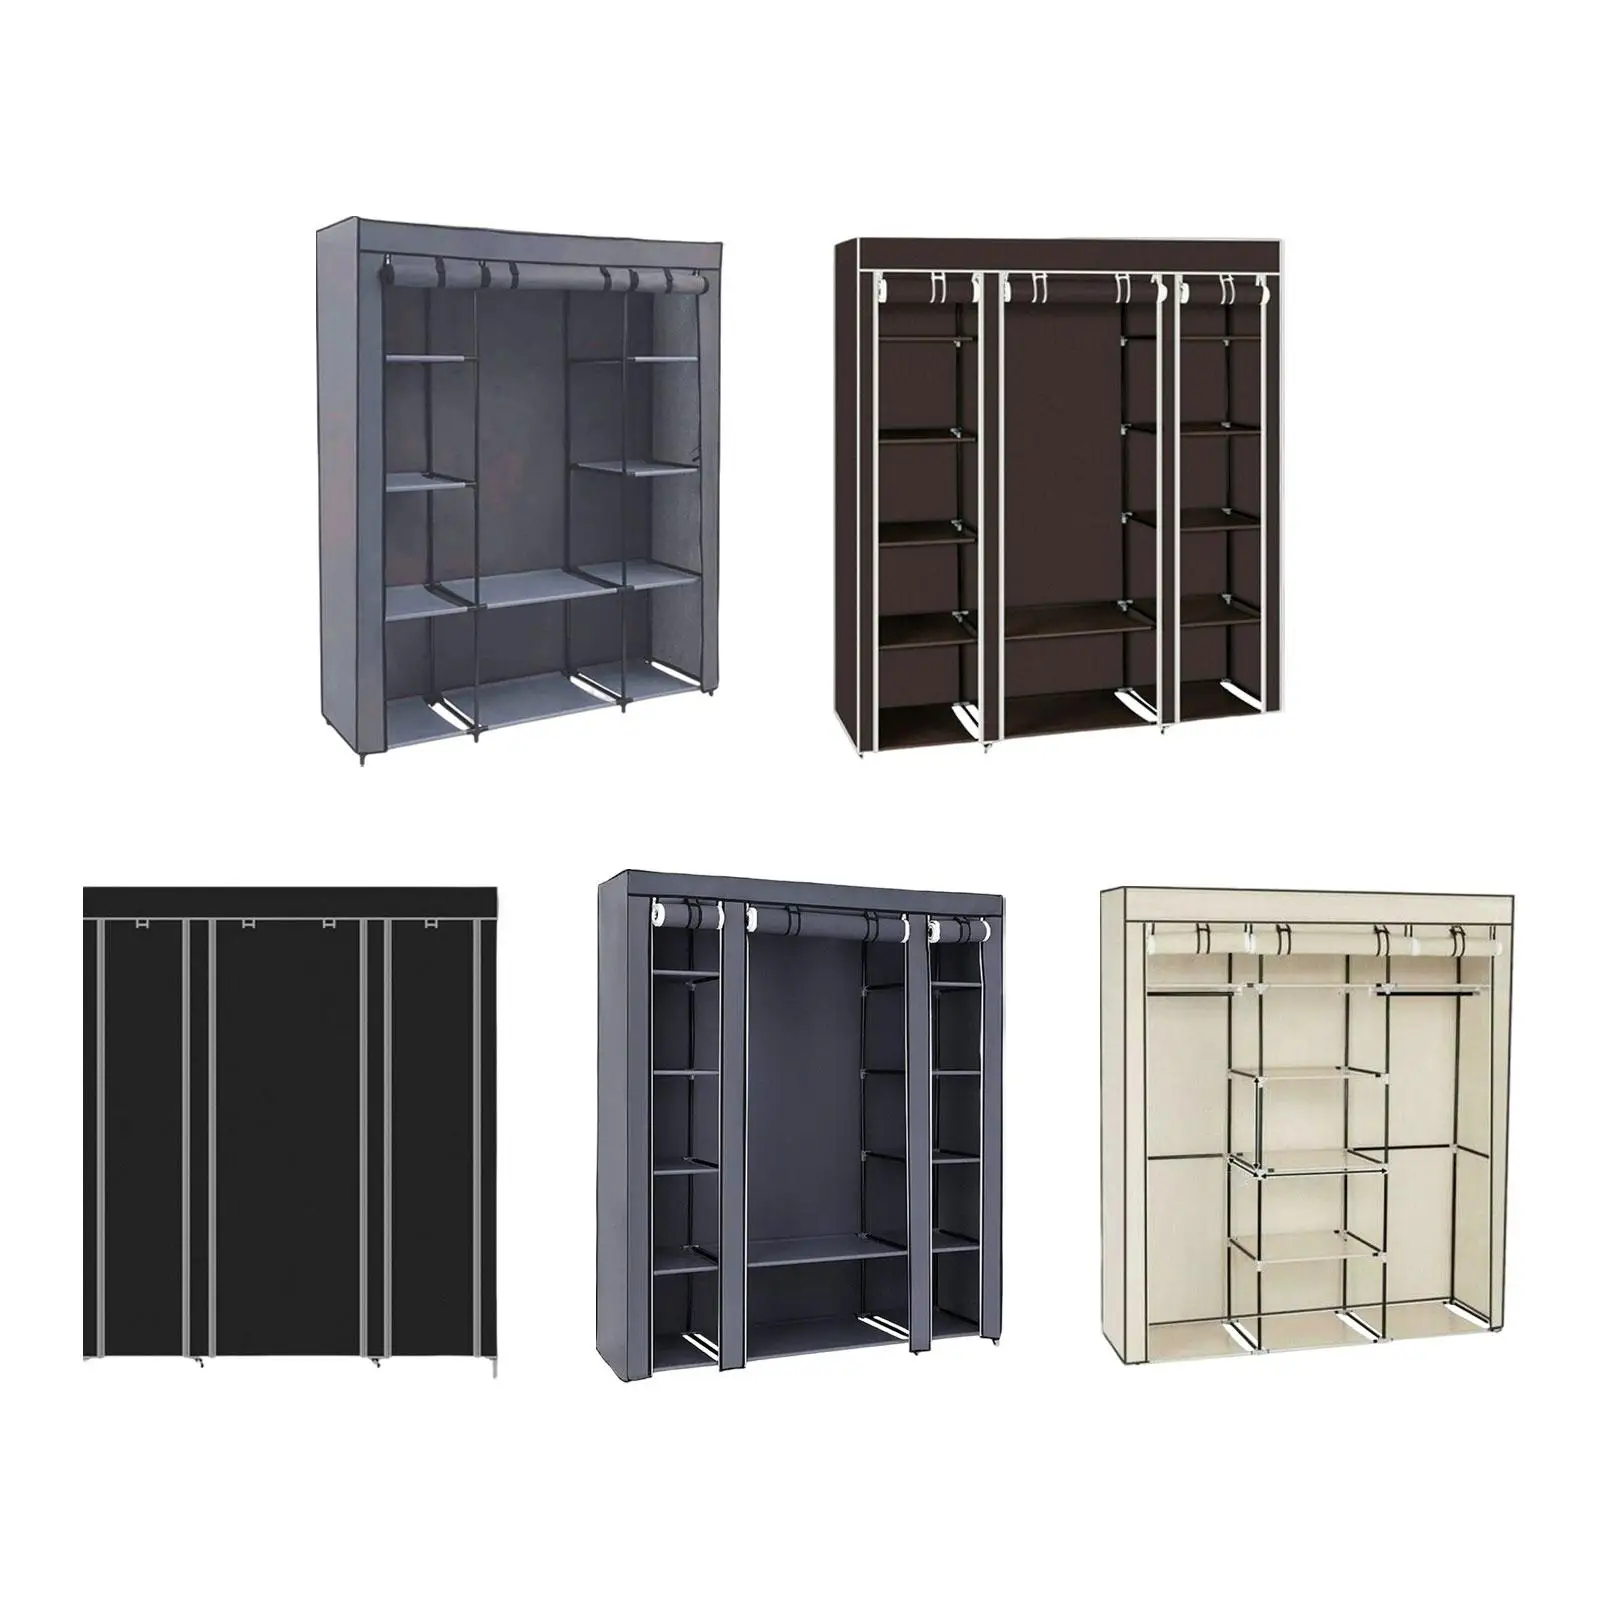 

Portable Wardrobe, Foldable Closet, Clothes Storage Organiser with Hanging Rail, Shelves, Fabric Cover, for Bedroom, Cloakroom